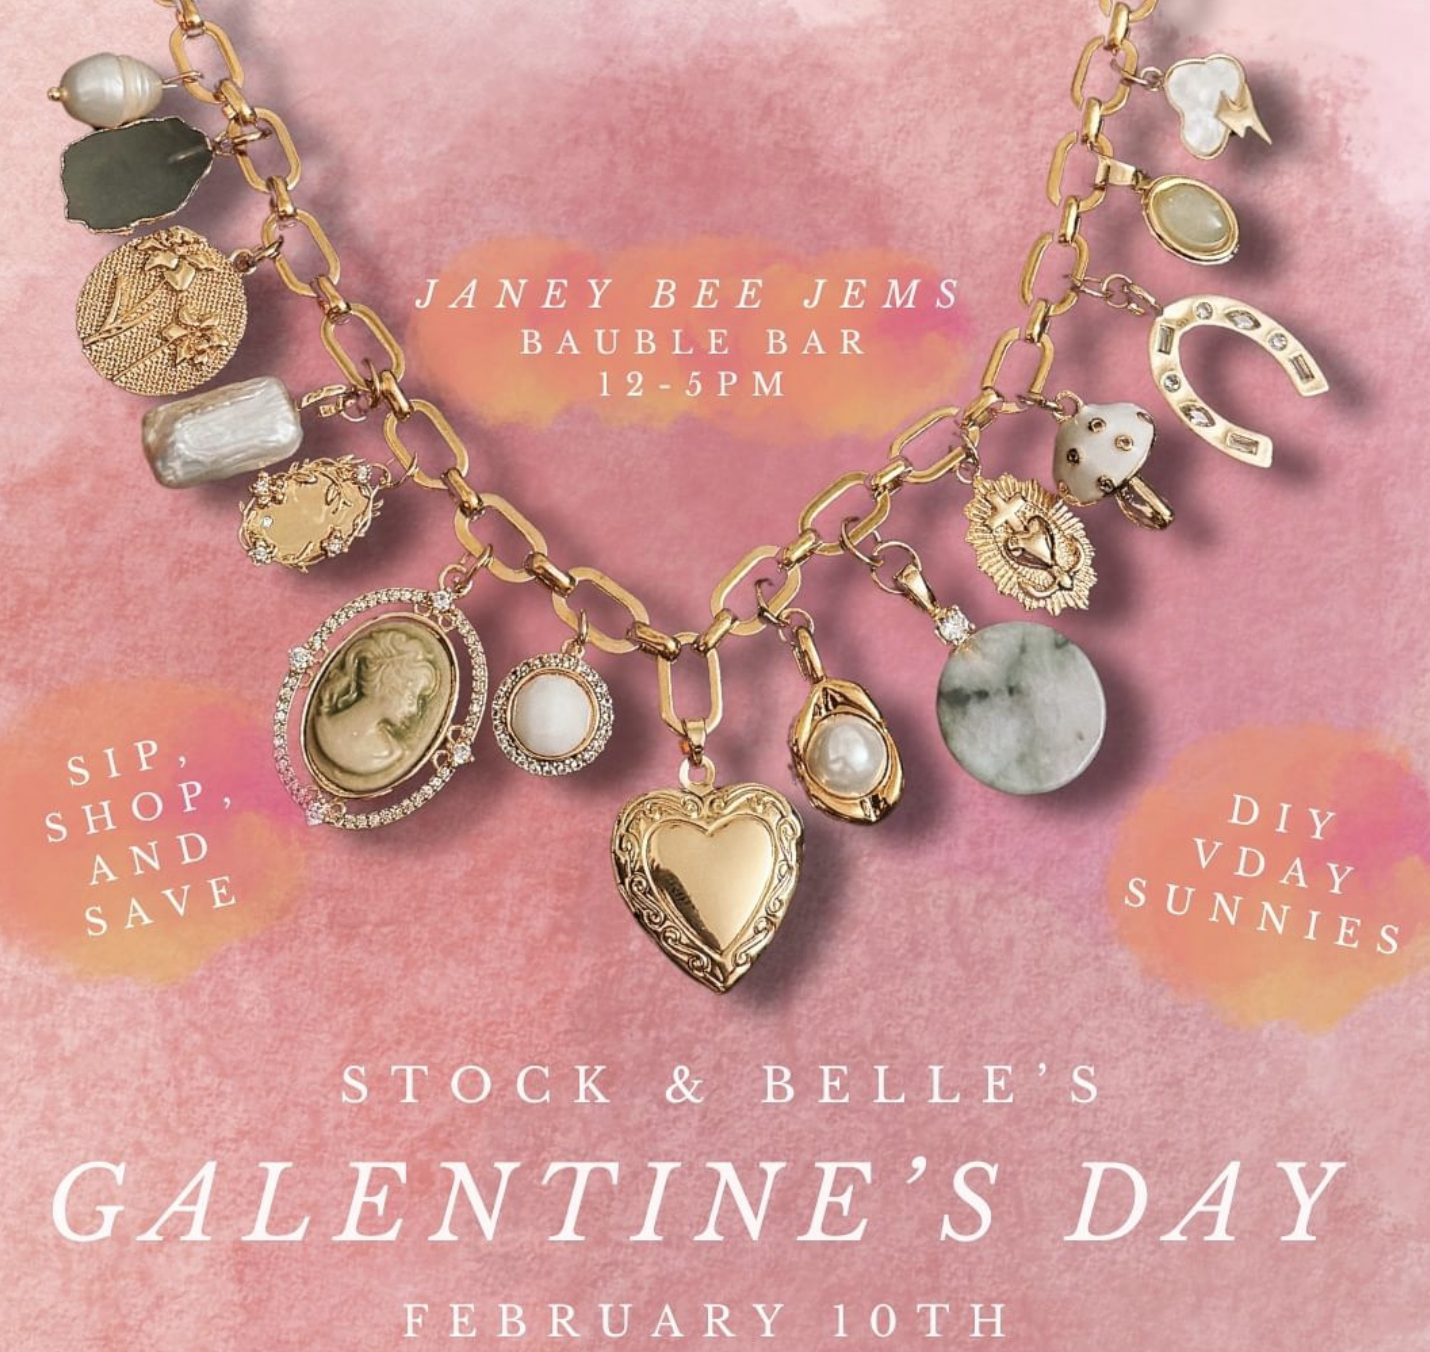 Stock & Belle's Valentine's Day Sale is the perfect opportunity to find incredible deals on a wide range of products. Whether you're shopping for yourself or looking for a special gift, Stock & Belle has